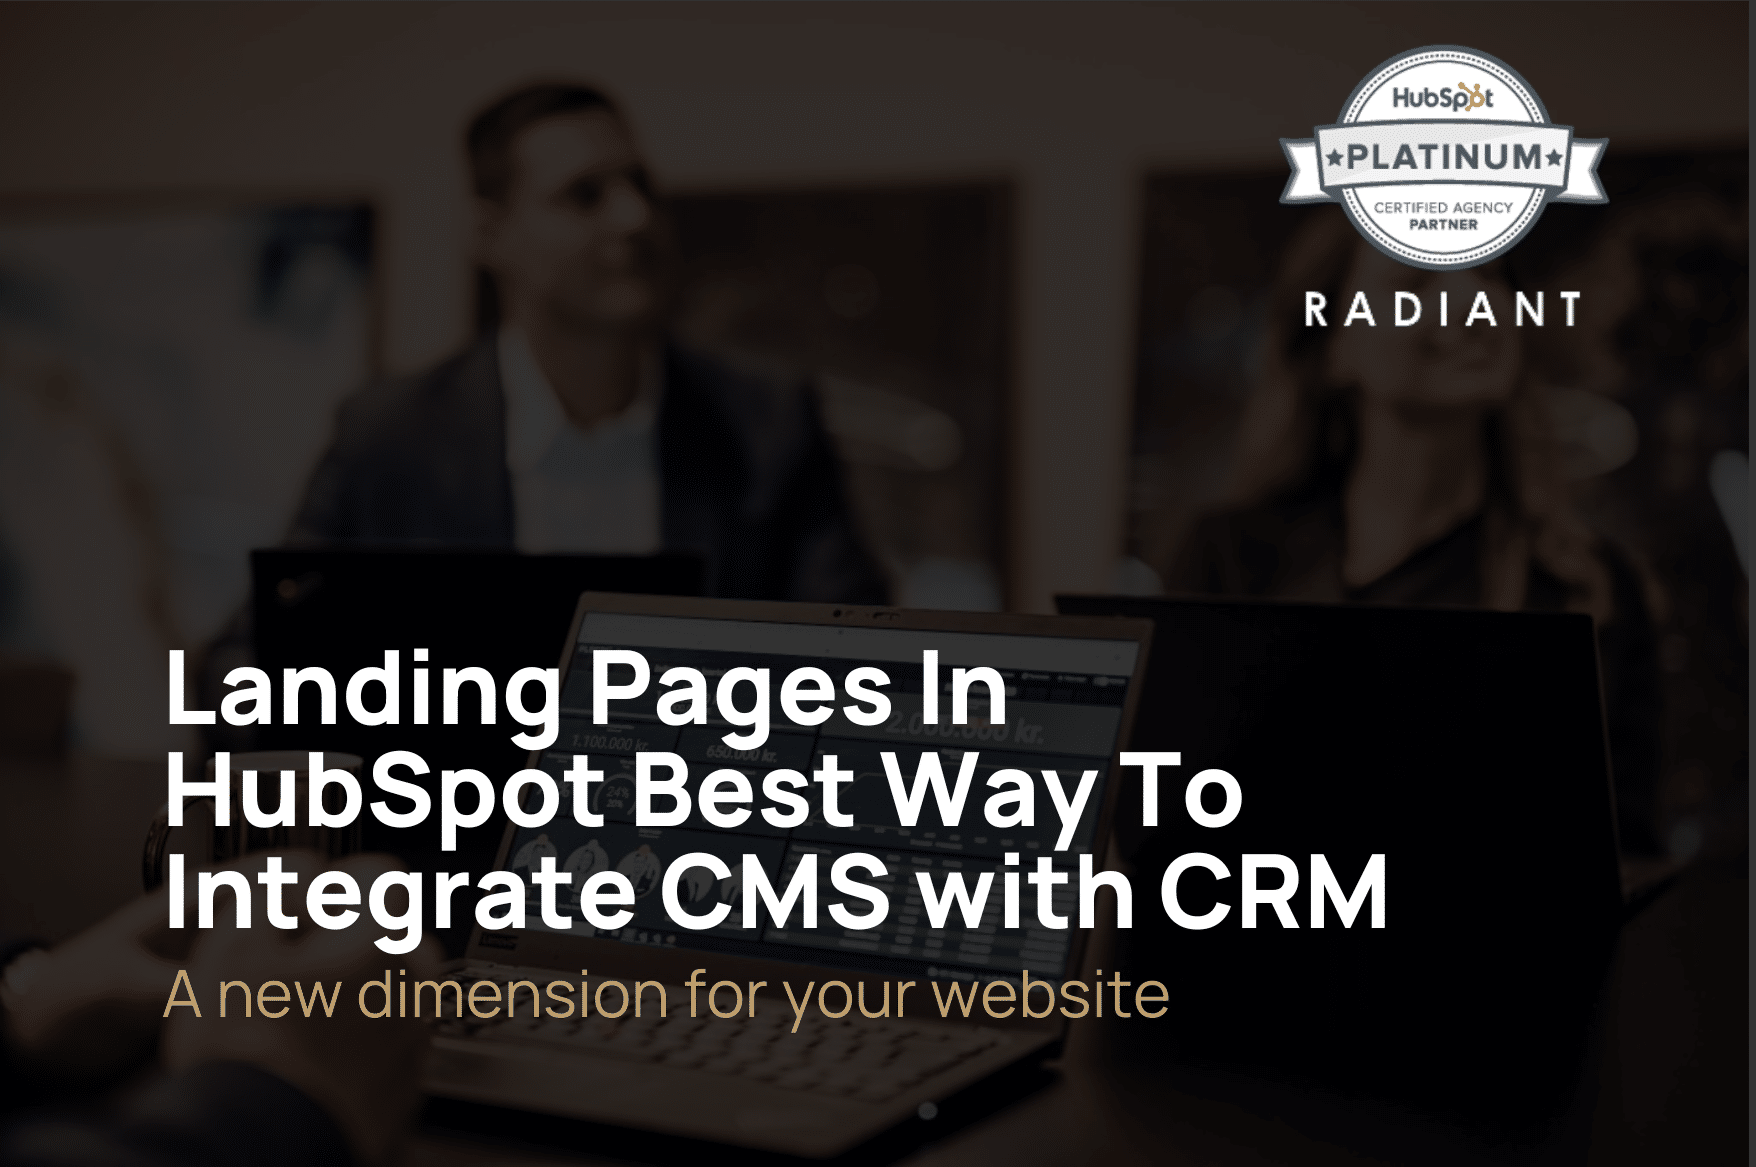 Landing Pages In HubSpot Best Way To Integrate CMS with CRM